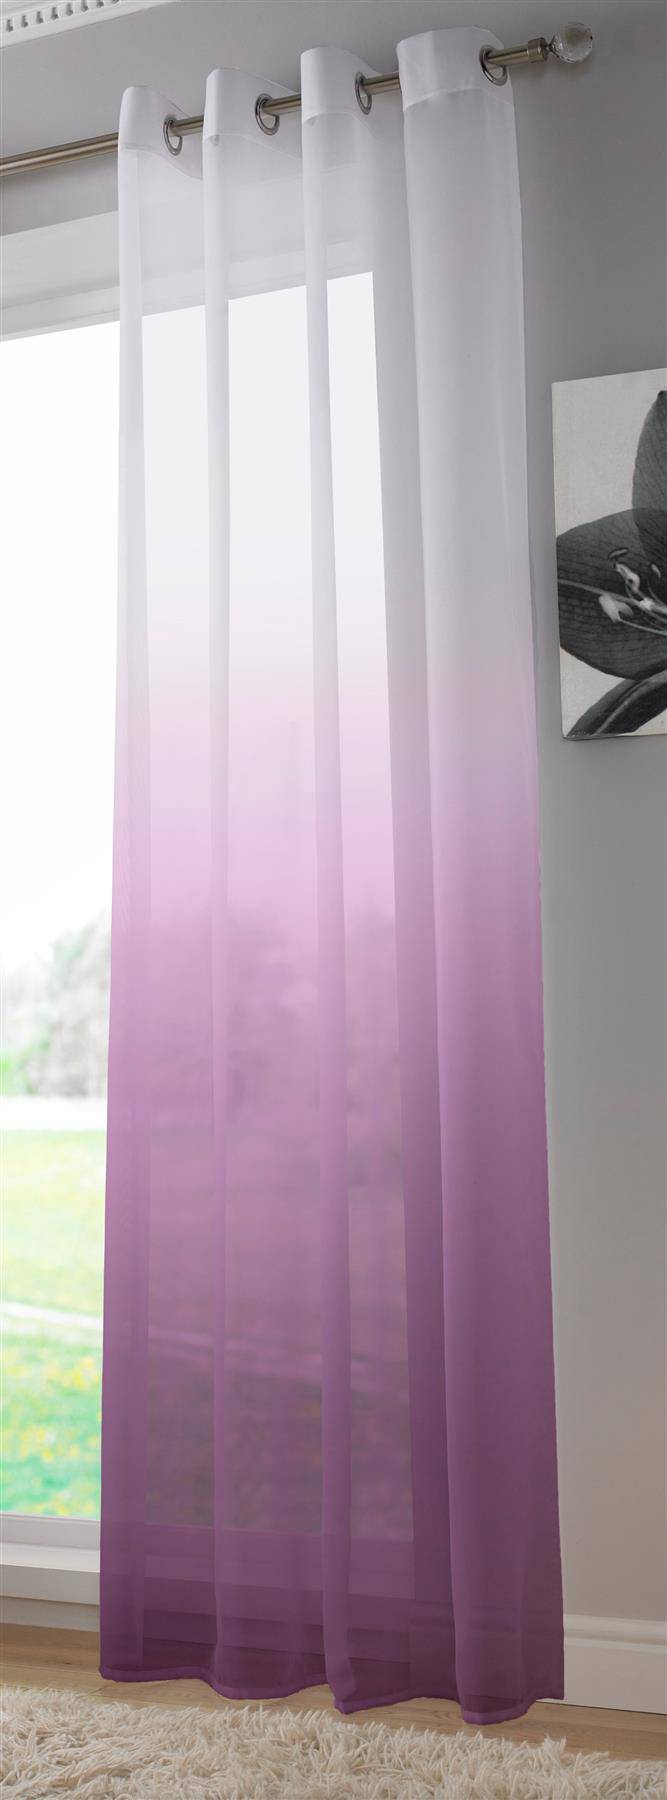 Harmony (Ring Top Curtain Panel) - TidySpaces